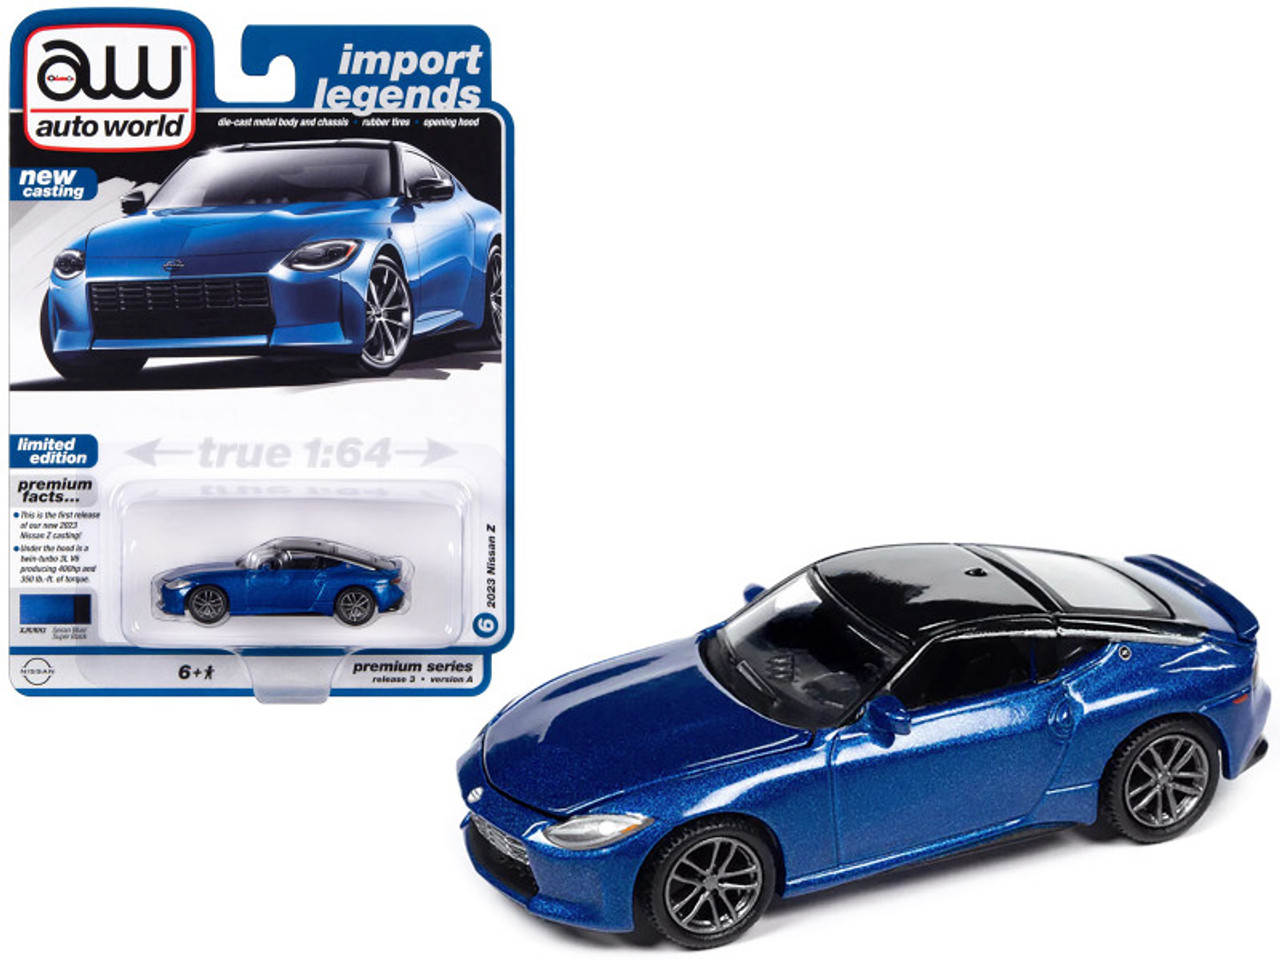 2023 Nissan Z Seiran Blue Metallic with Super Black Top "Import Legends" Limited Edition 1/64 Diecast Model Car by Auto World